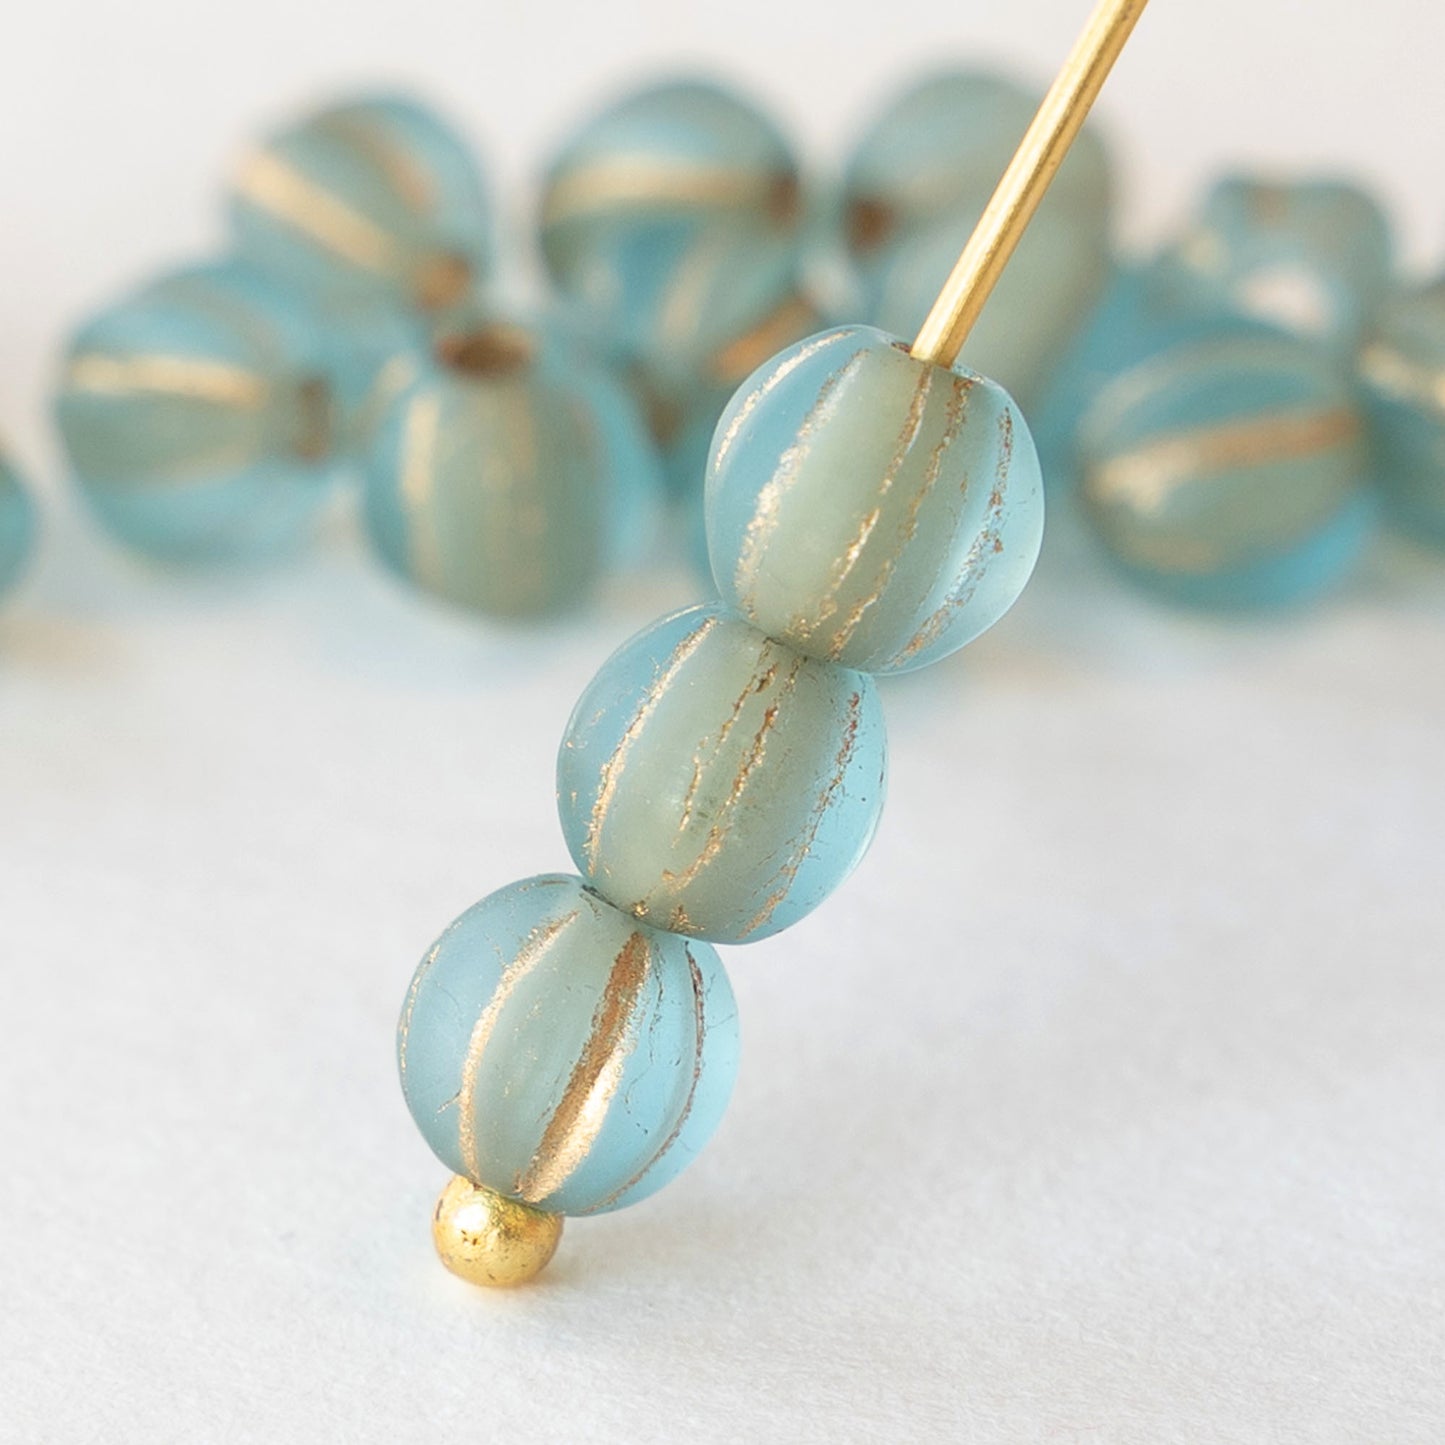 20 8mm Melon Beads 8mm Czech Glass Beads Large Hole Beads for Jewelry Making  2mm Hole Green Blue Mix With Bronze Wash 20 Beads 